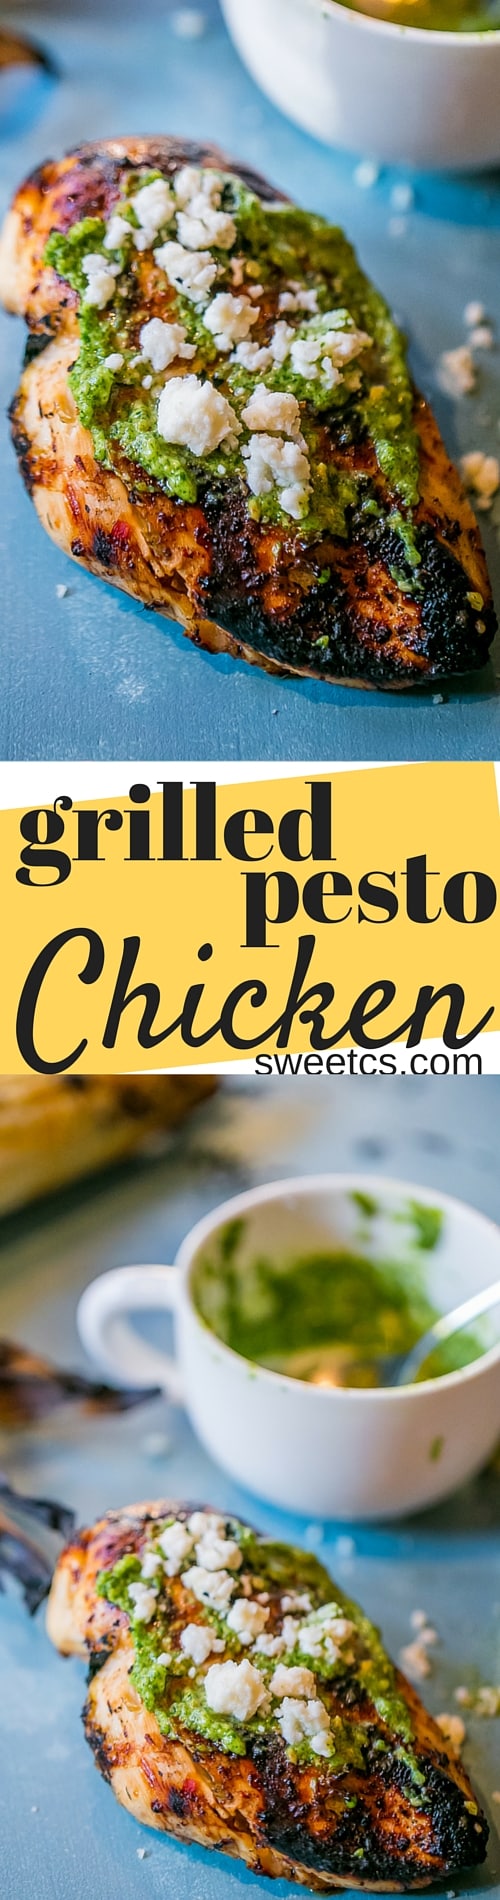 This is the best grilled chicken recipe - and love the cilantro pesto topping! 